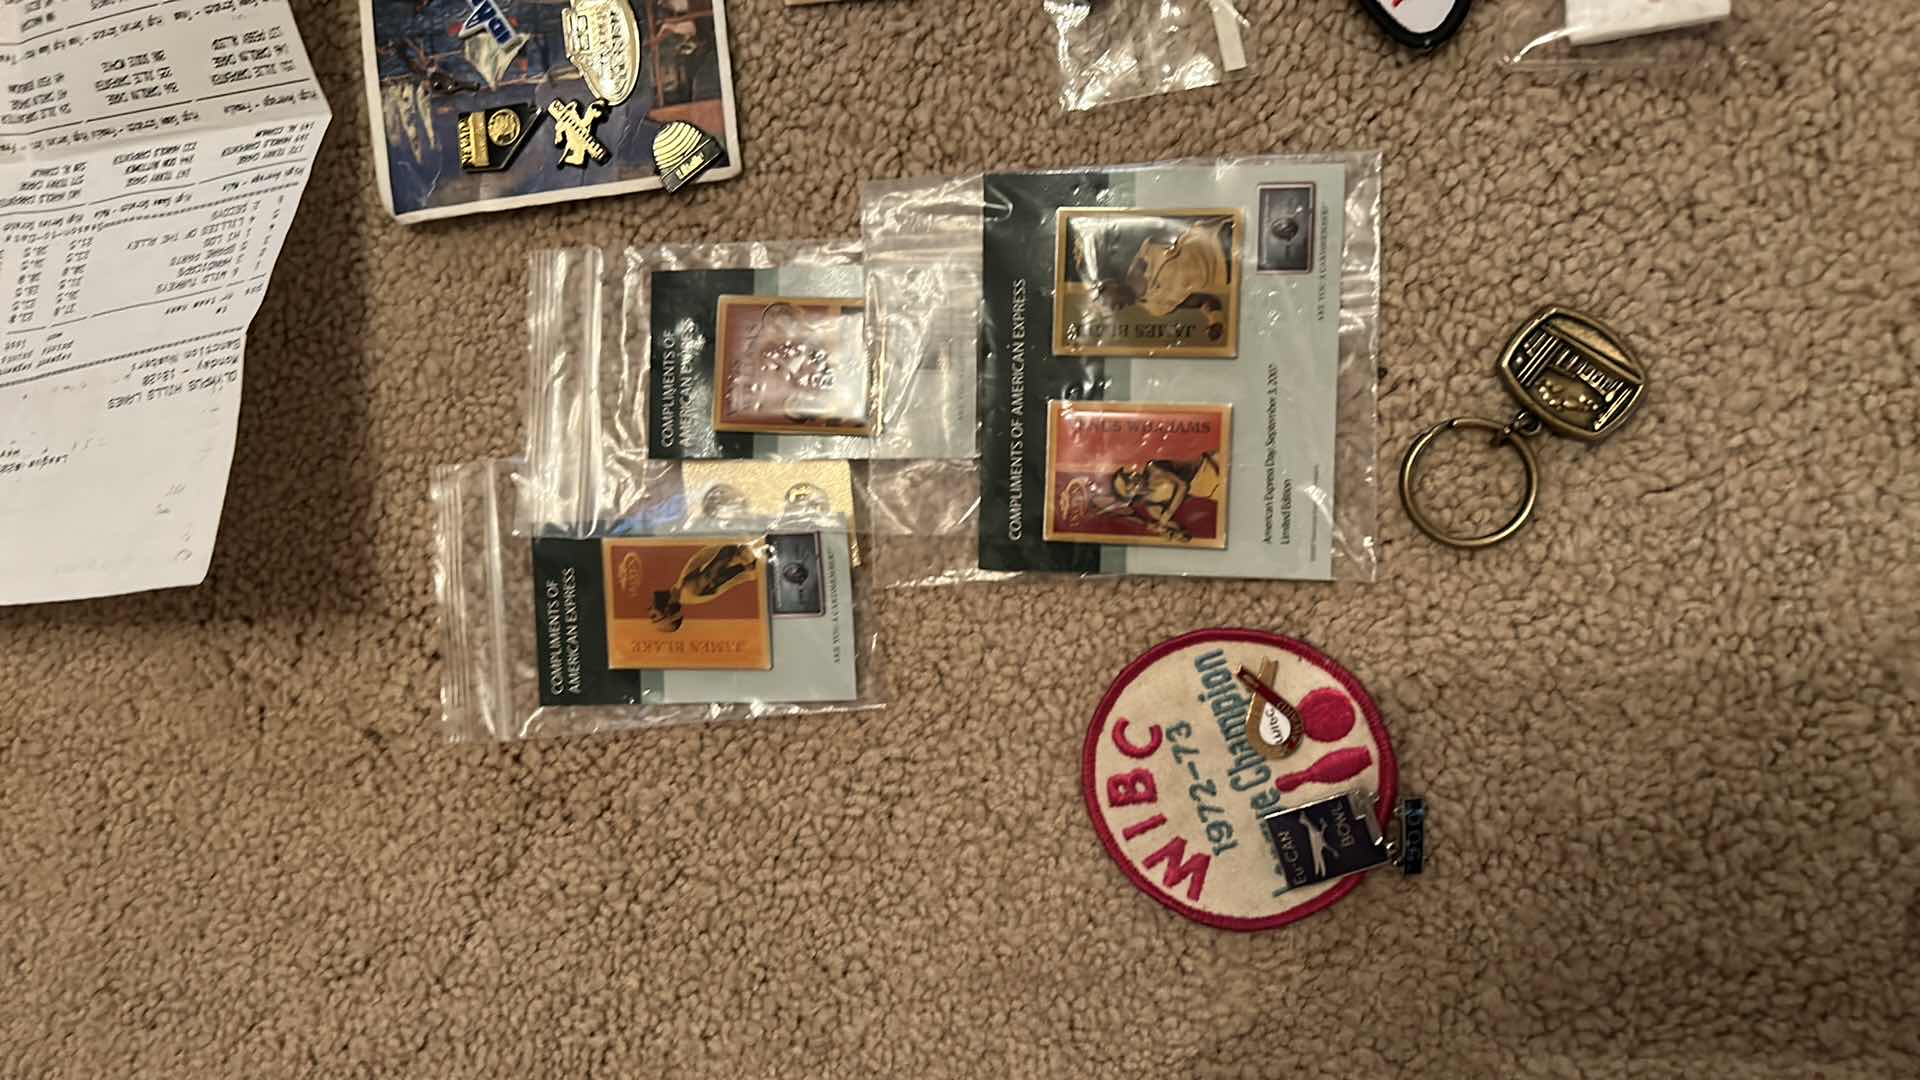 Photo 2 of Vintage memorabilia, pins, and jewelry